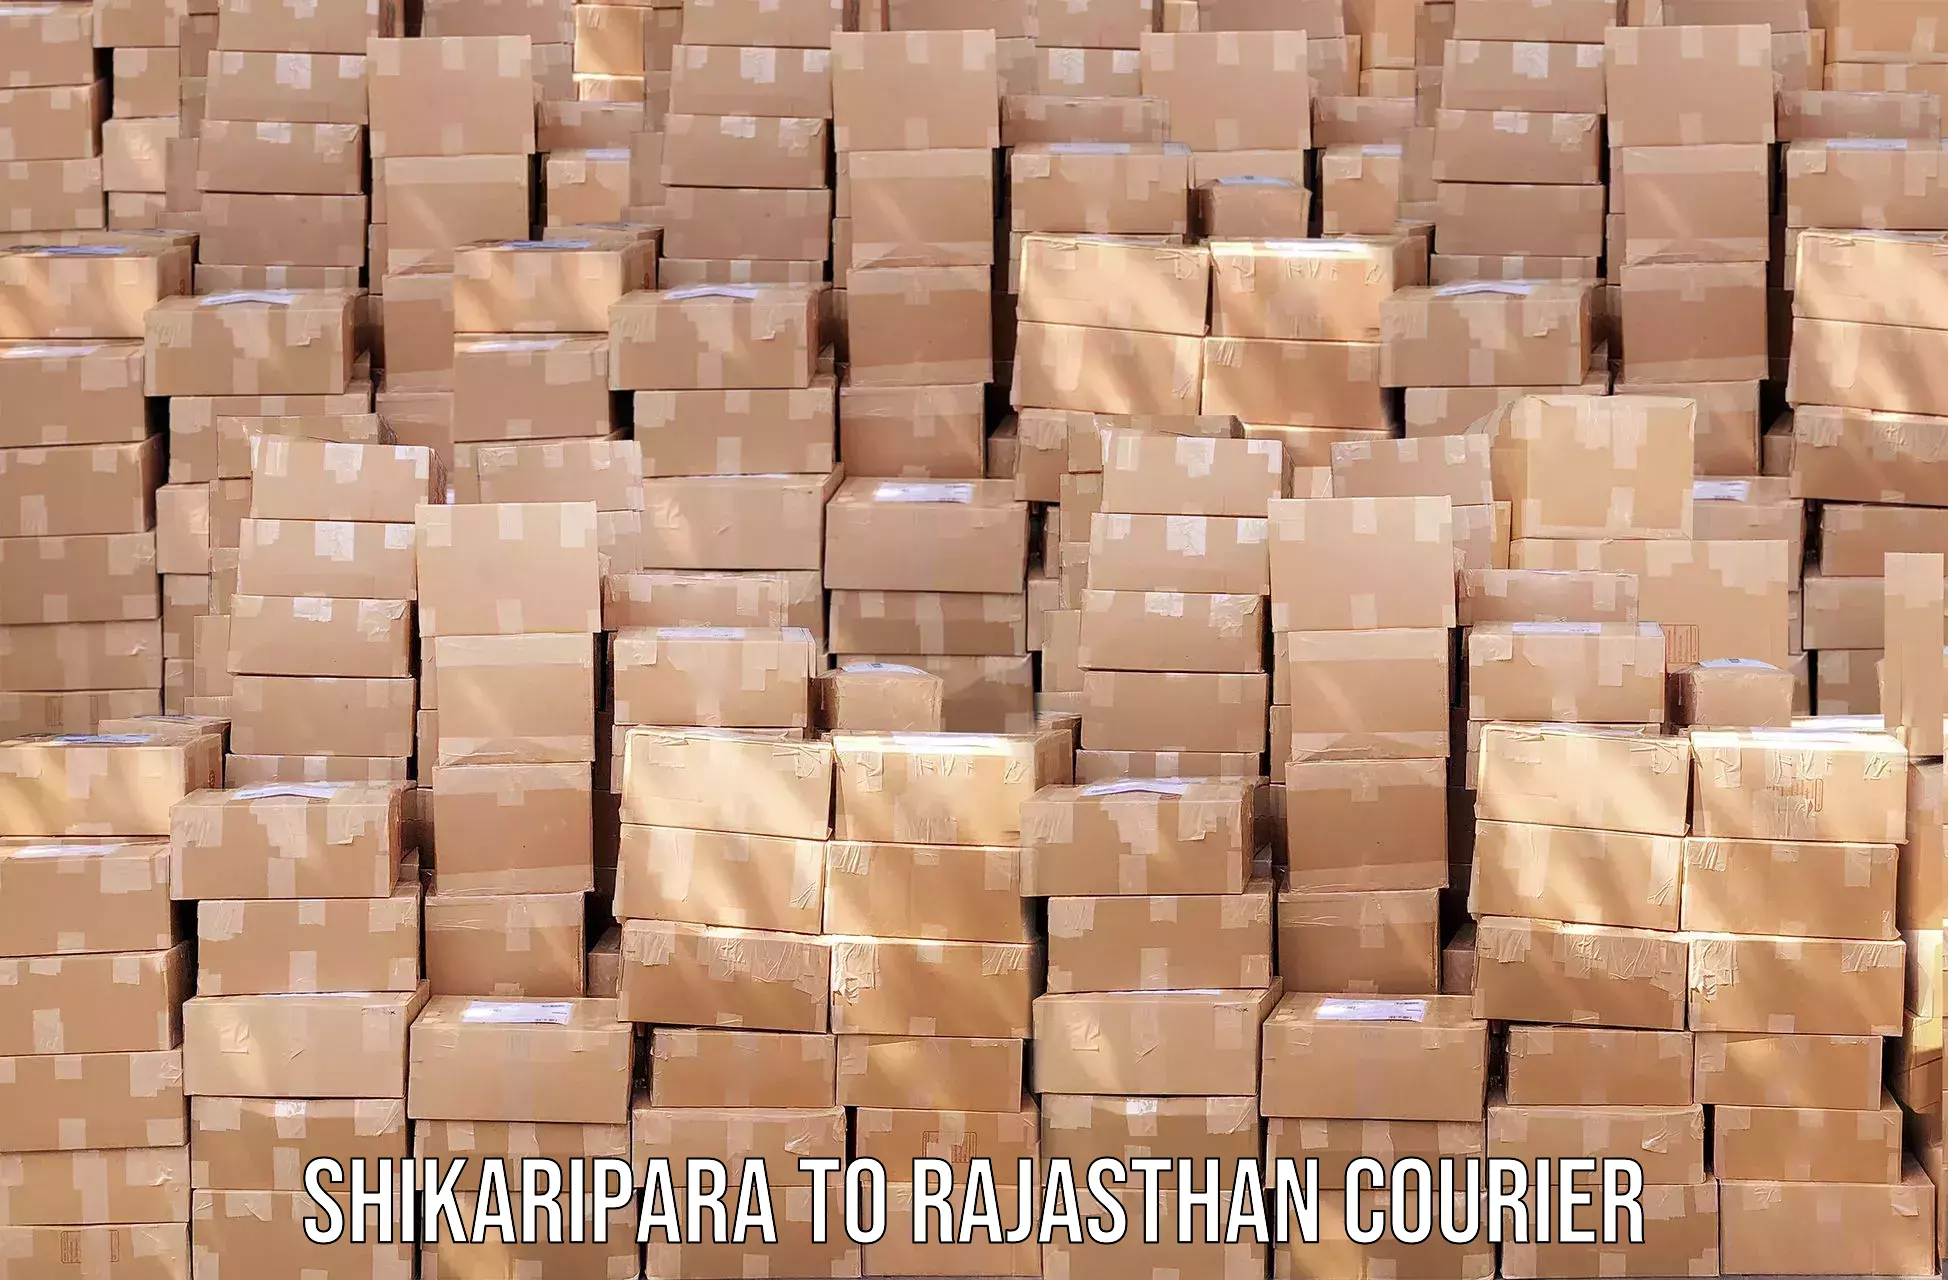 Fast delivery service Shikaripara to Birla Institute of Technology and Science Pilani